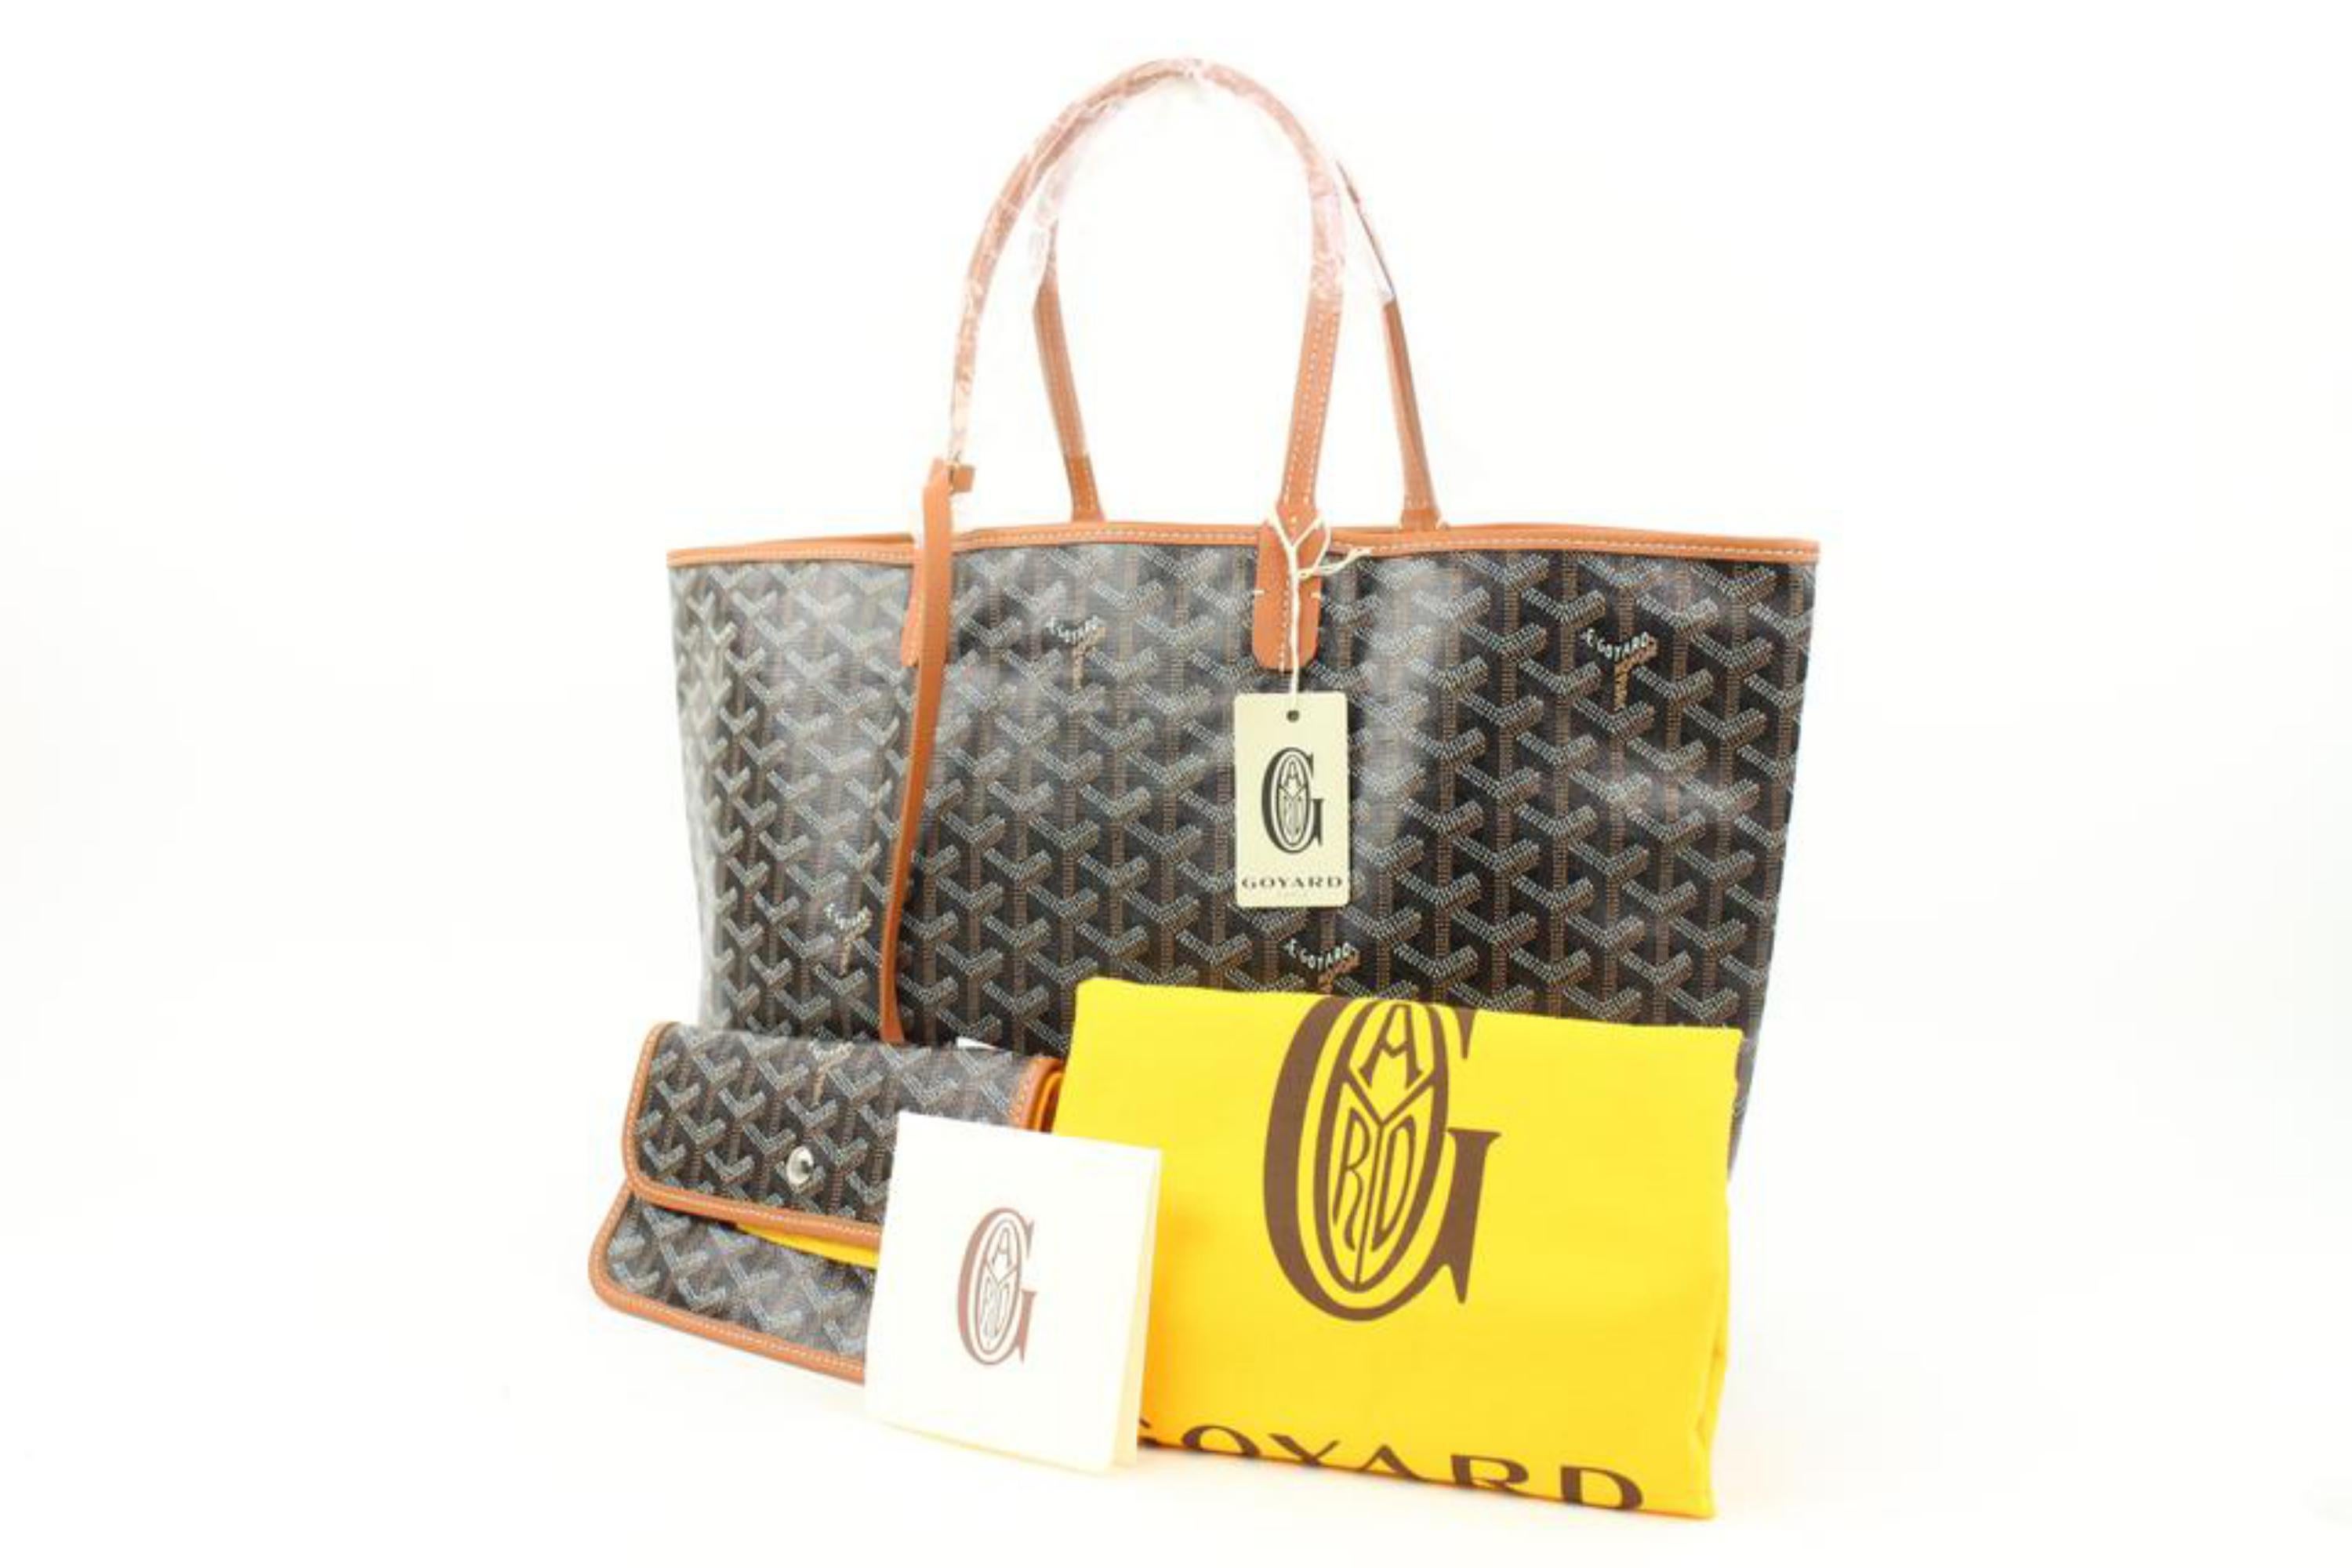 Goyard Black x Brown Chevron St Louis PM Tote Bag 17gy126s
Date Code/Serial Number: ADM 120201
Made In: France
Measurements: Length:  18